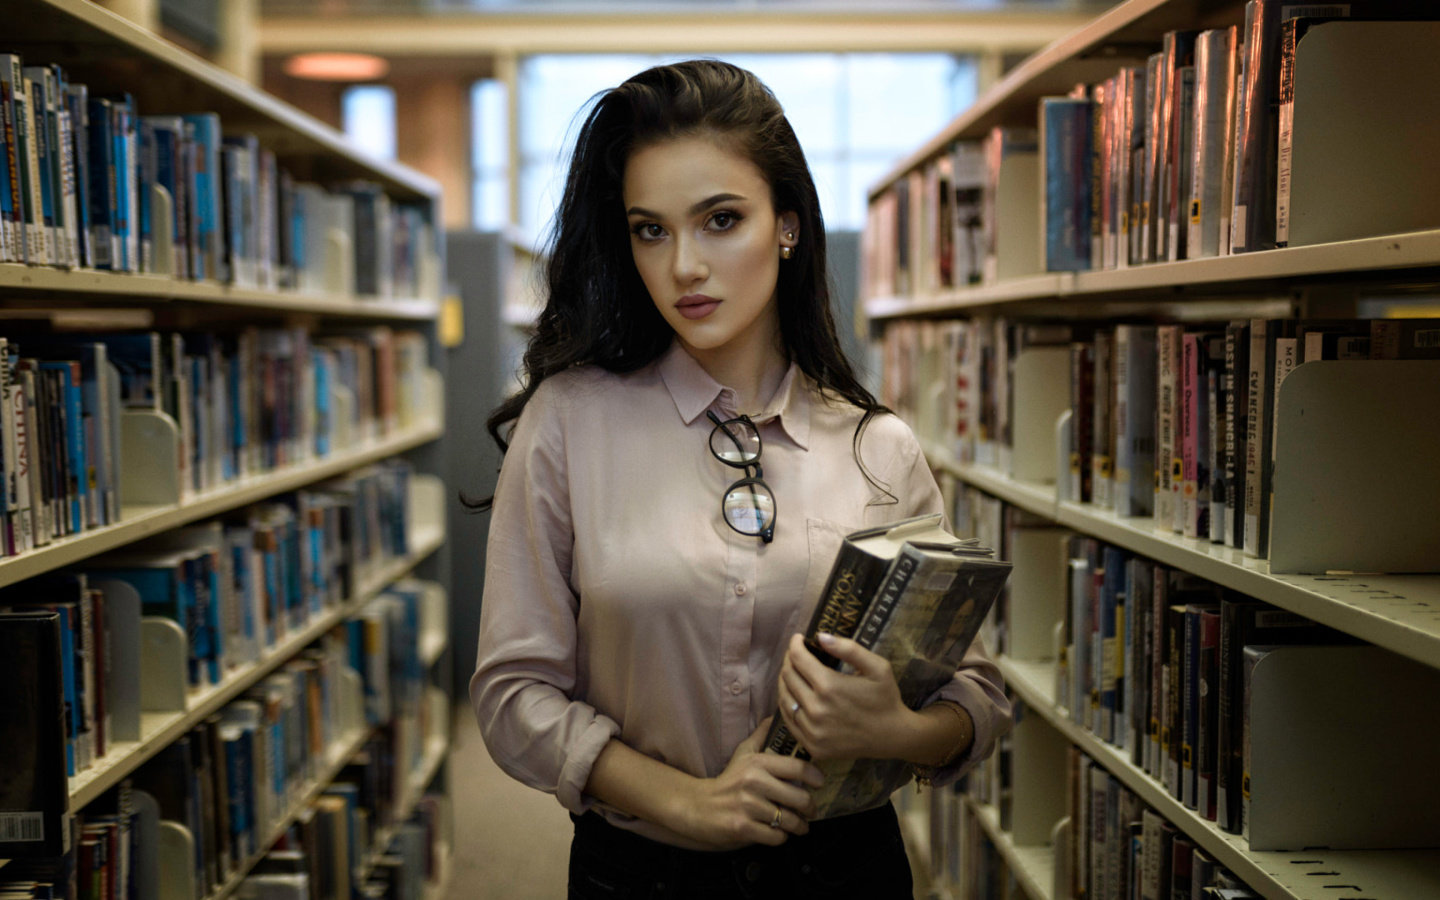 Girl with books in library screenshot #1 1440x900